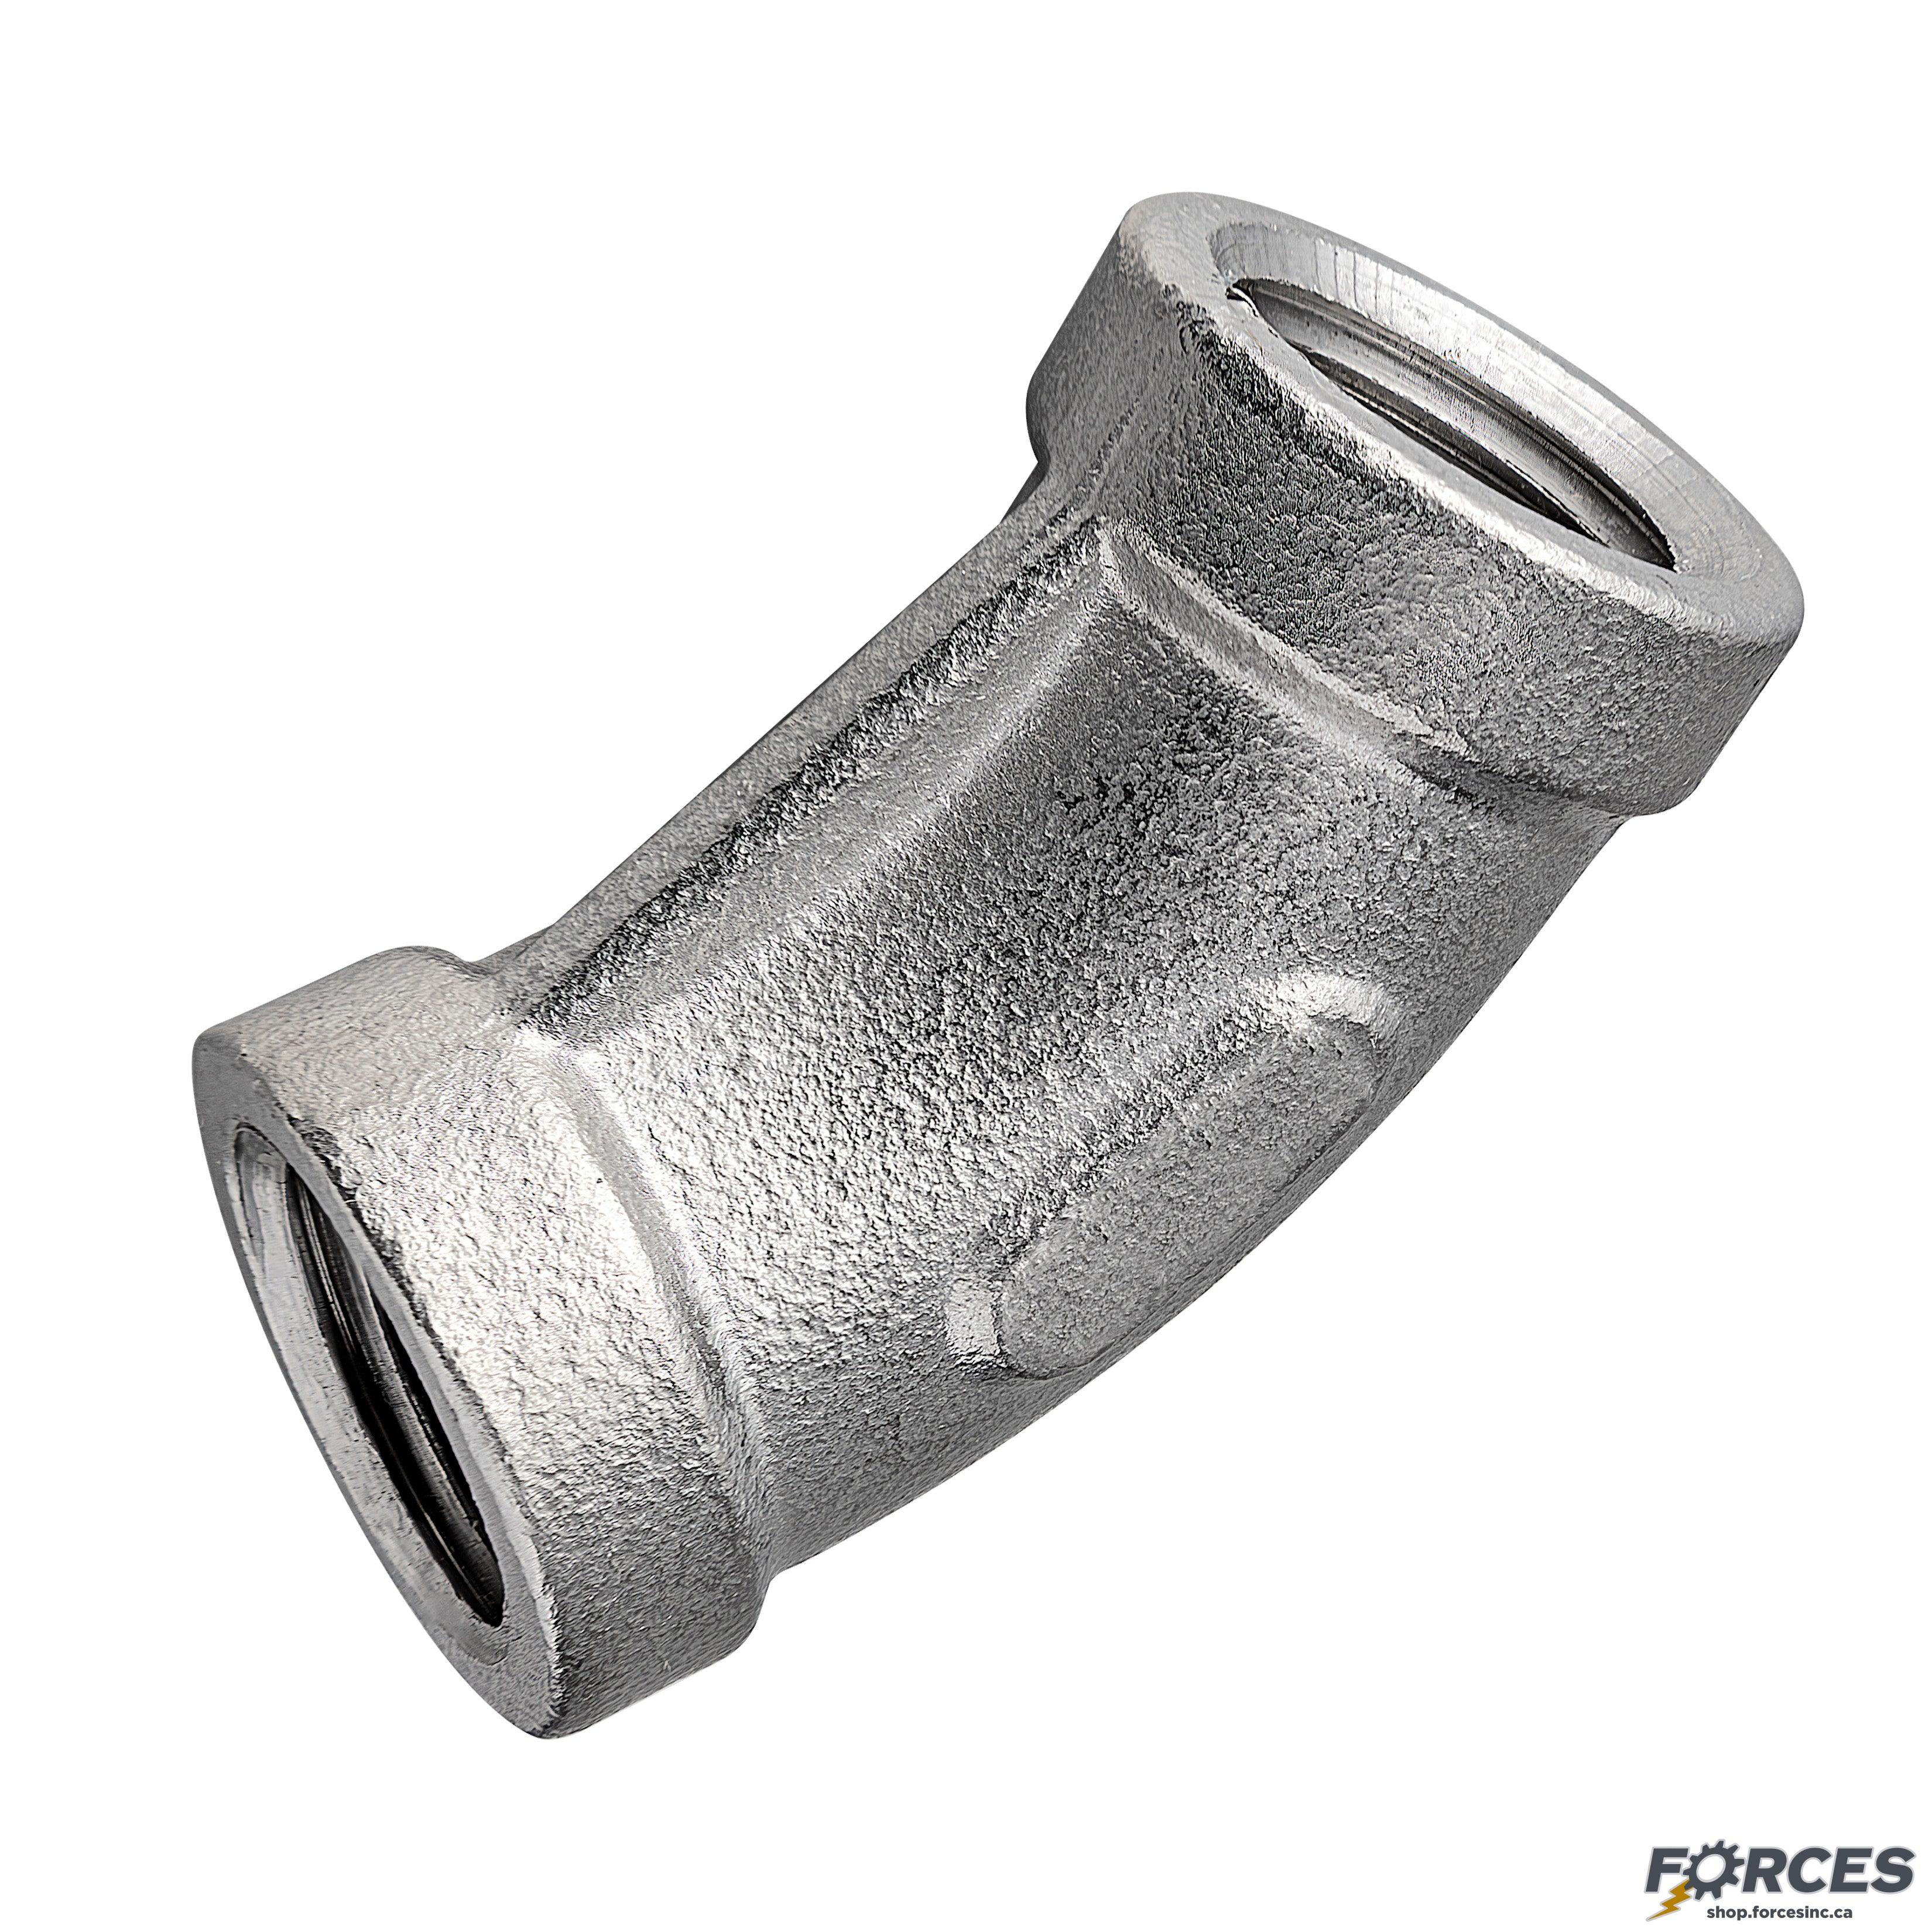 1/8" Elbow 45° NPT #150 - Stainless Steel 316 - Forces Inc